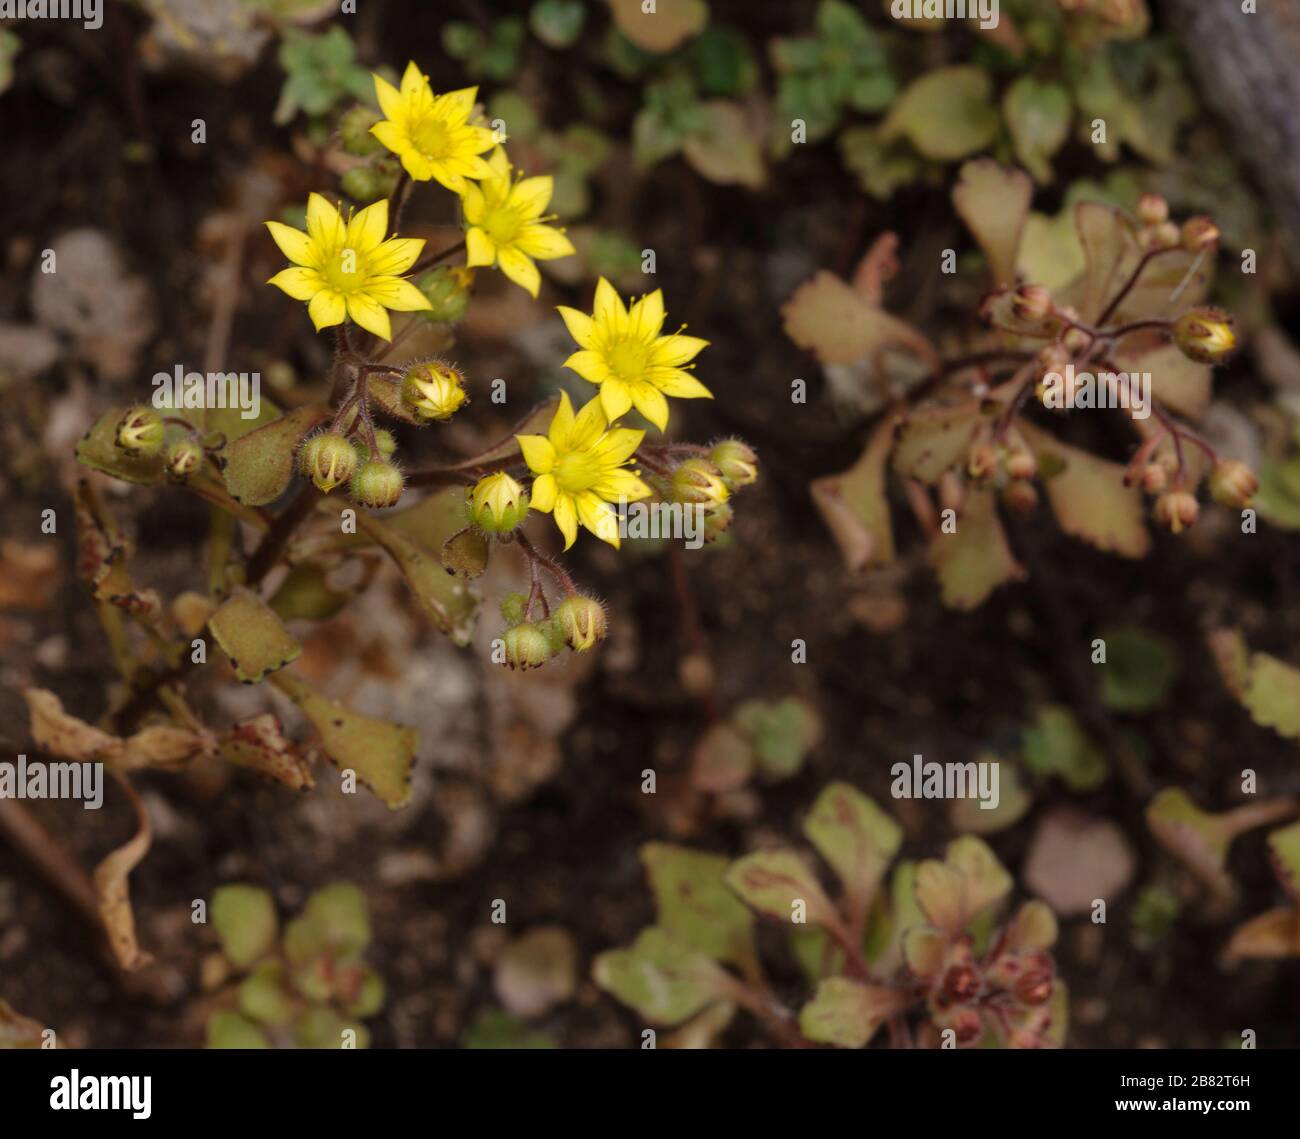 Aichryson punctatum, endemism of the Canary islands, stonecrop family Stock Photo